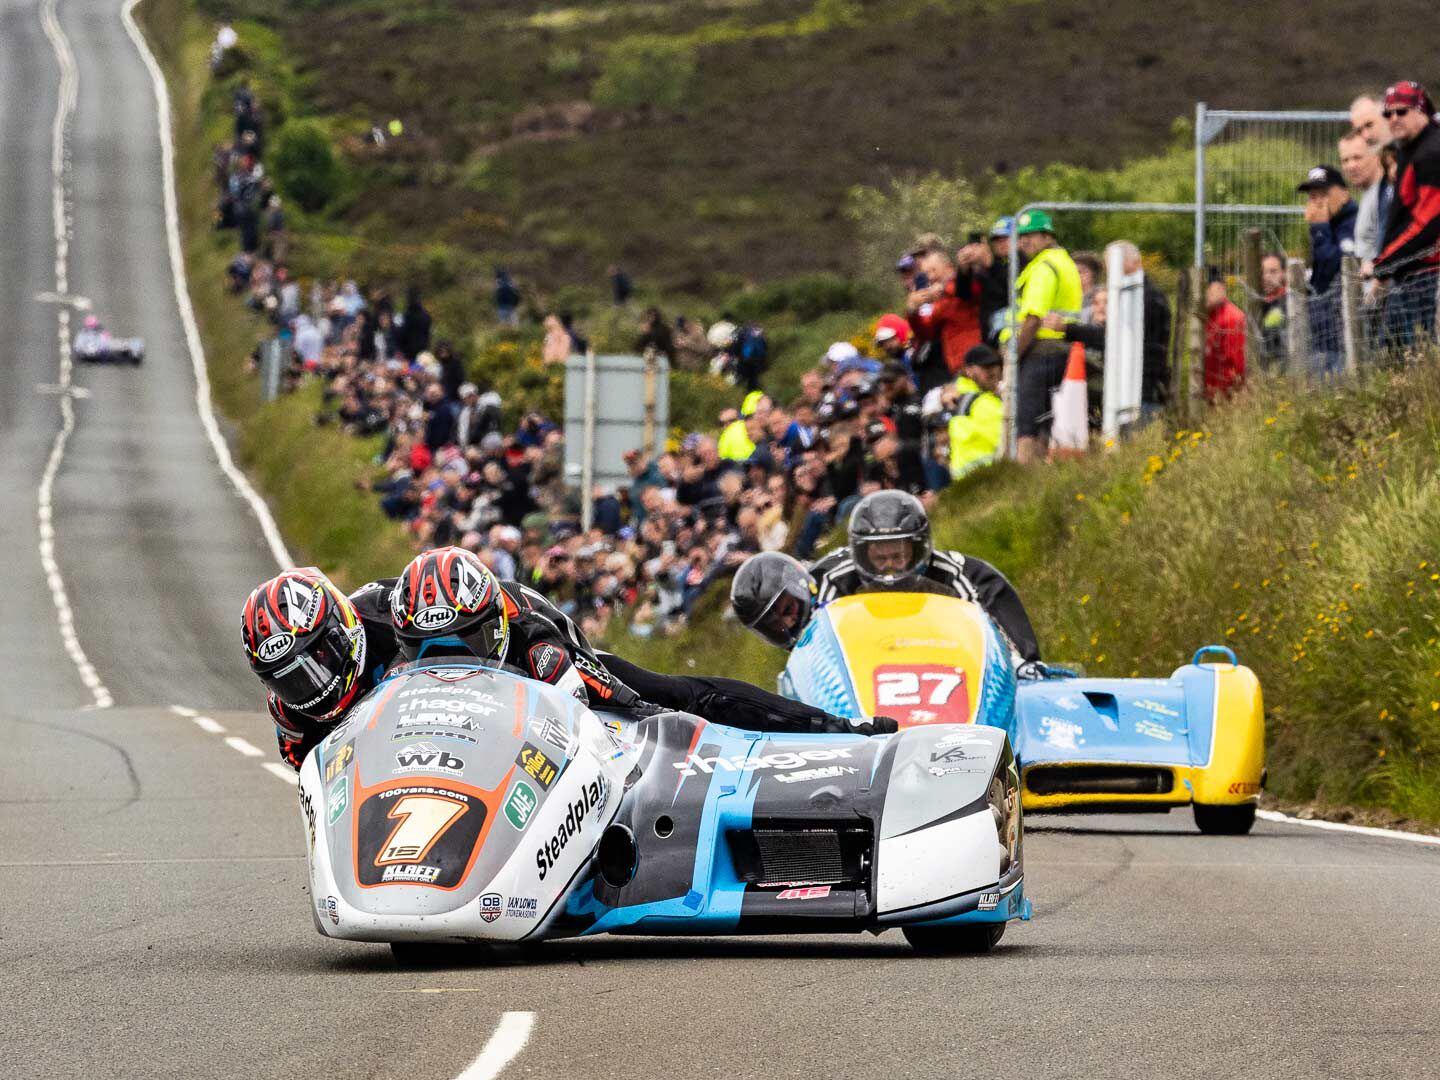 Ben and Tom Birchall en route to their 14th consecutive TT win, passing Creg-Ny-Baa 3 miles from the finish line. Tom leans over Ben to optimize the balance of the sidecar.